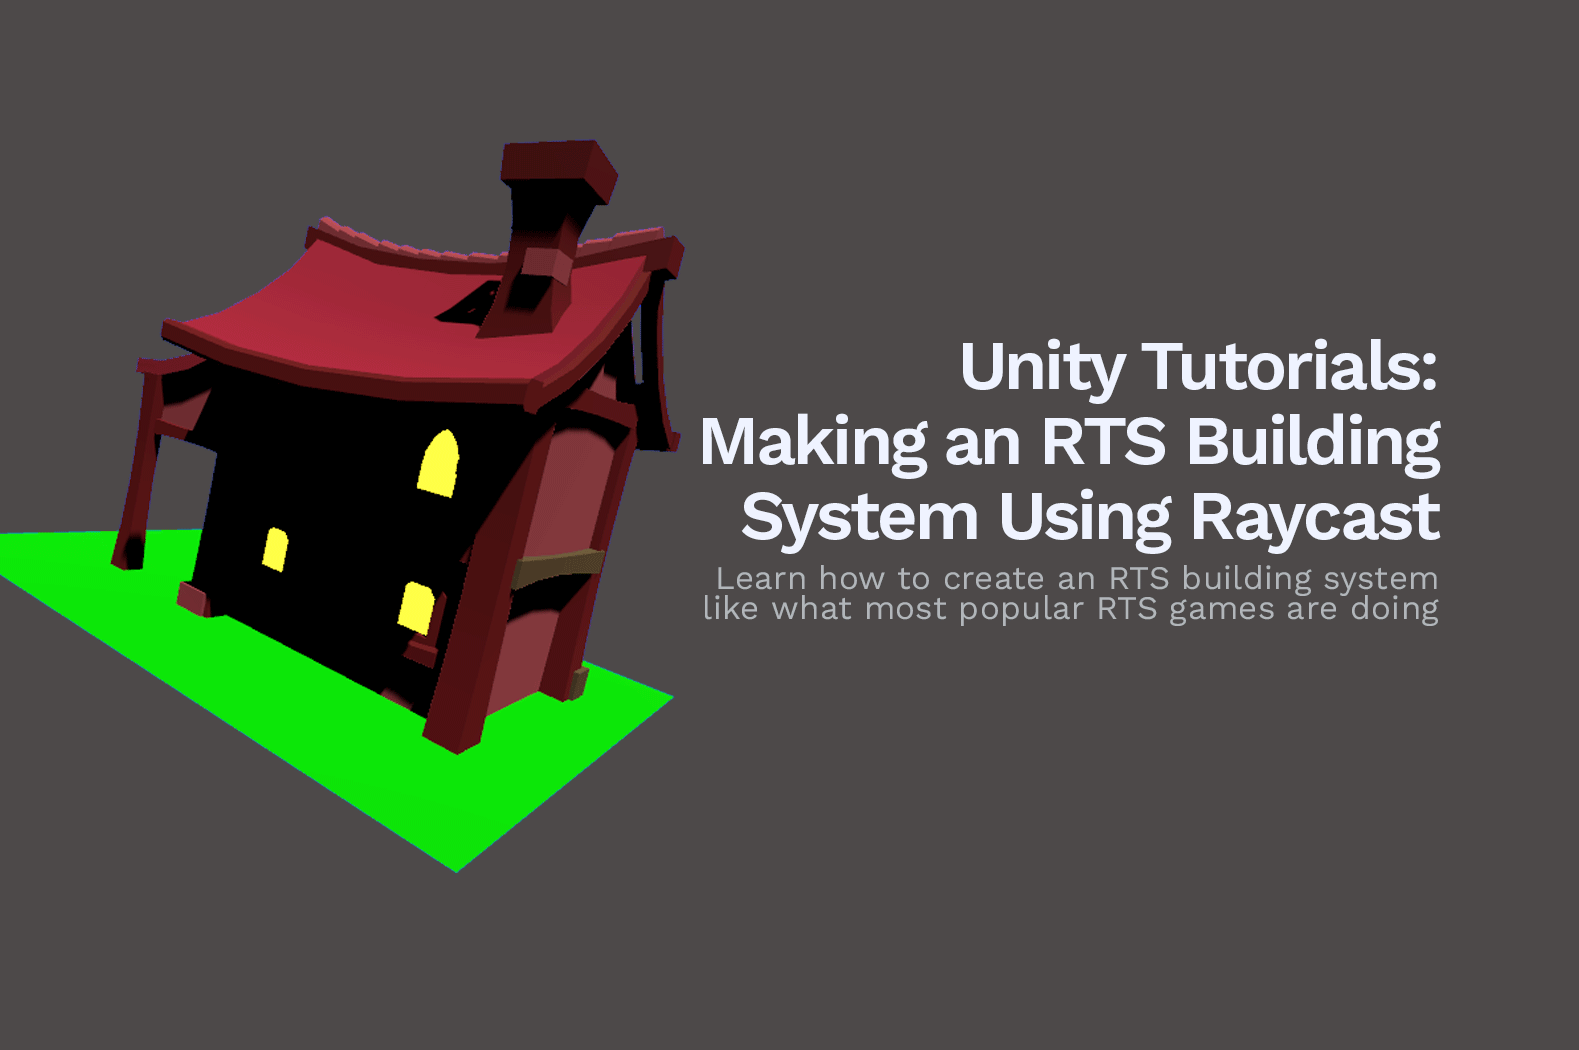 Unity Tutorial: Making an RTS Building System Using Raycast